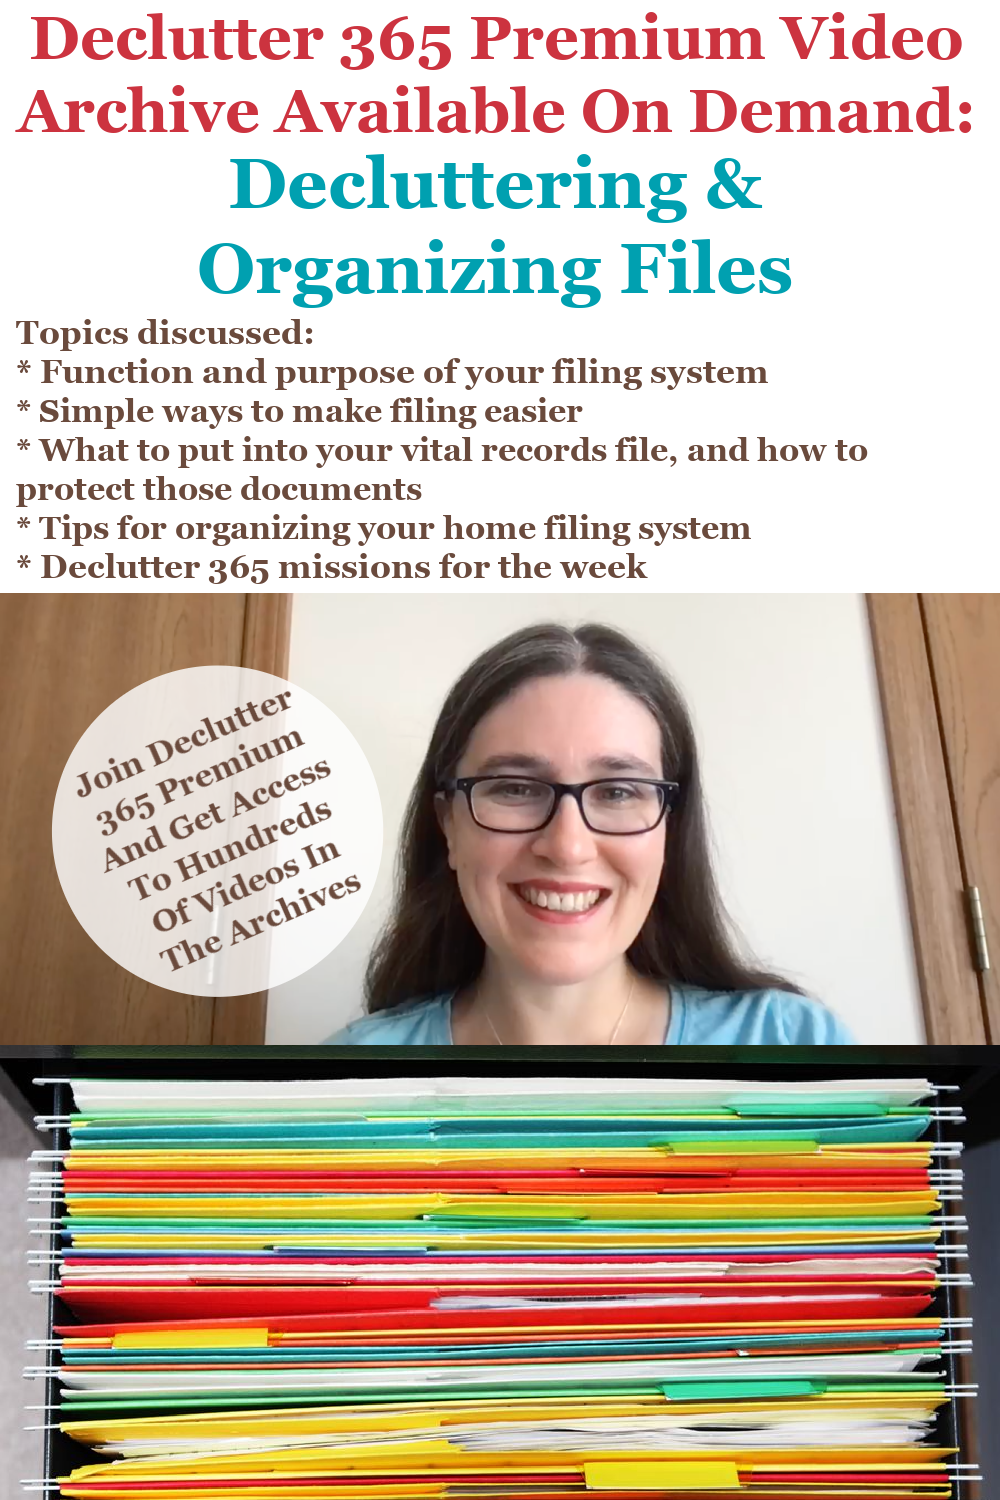 How To Organize Files In Your Home To Find Things When You Need Them